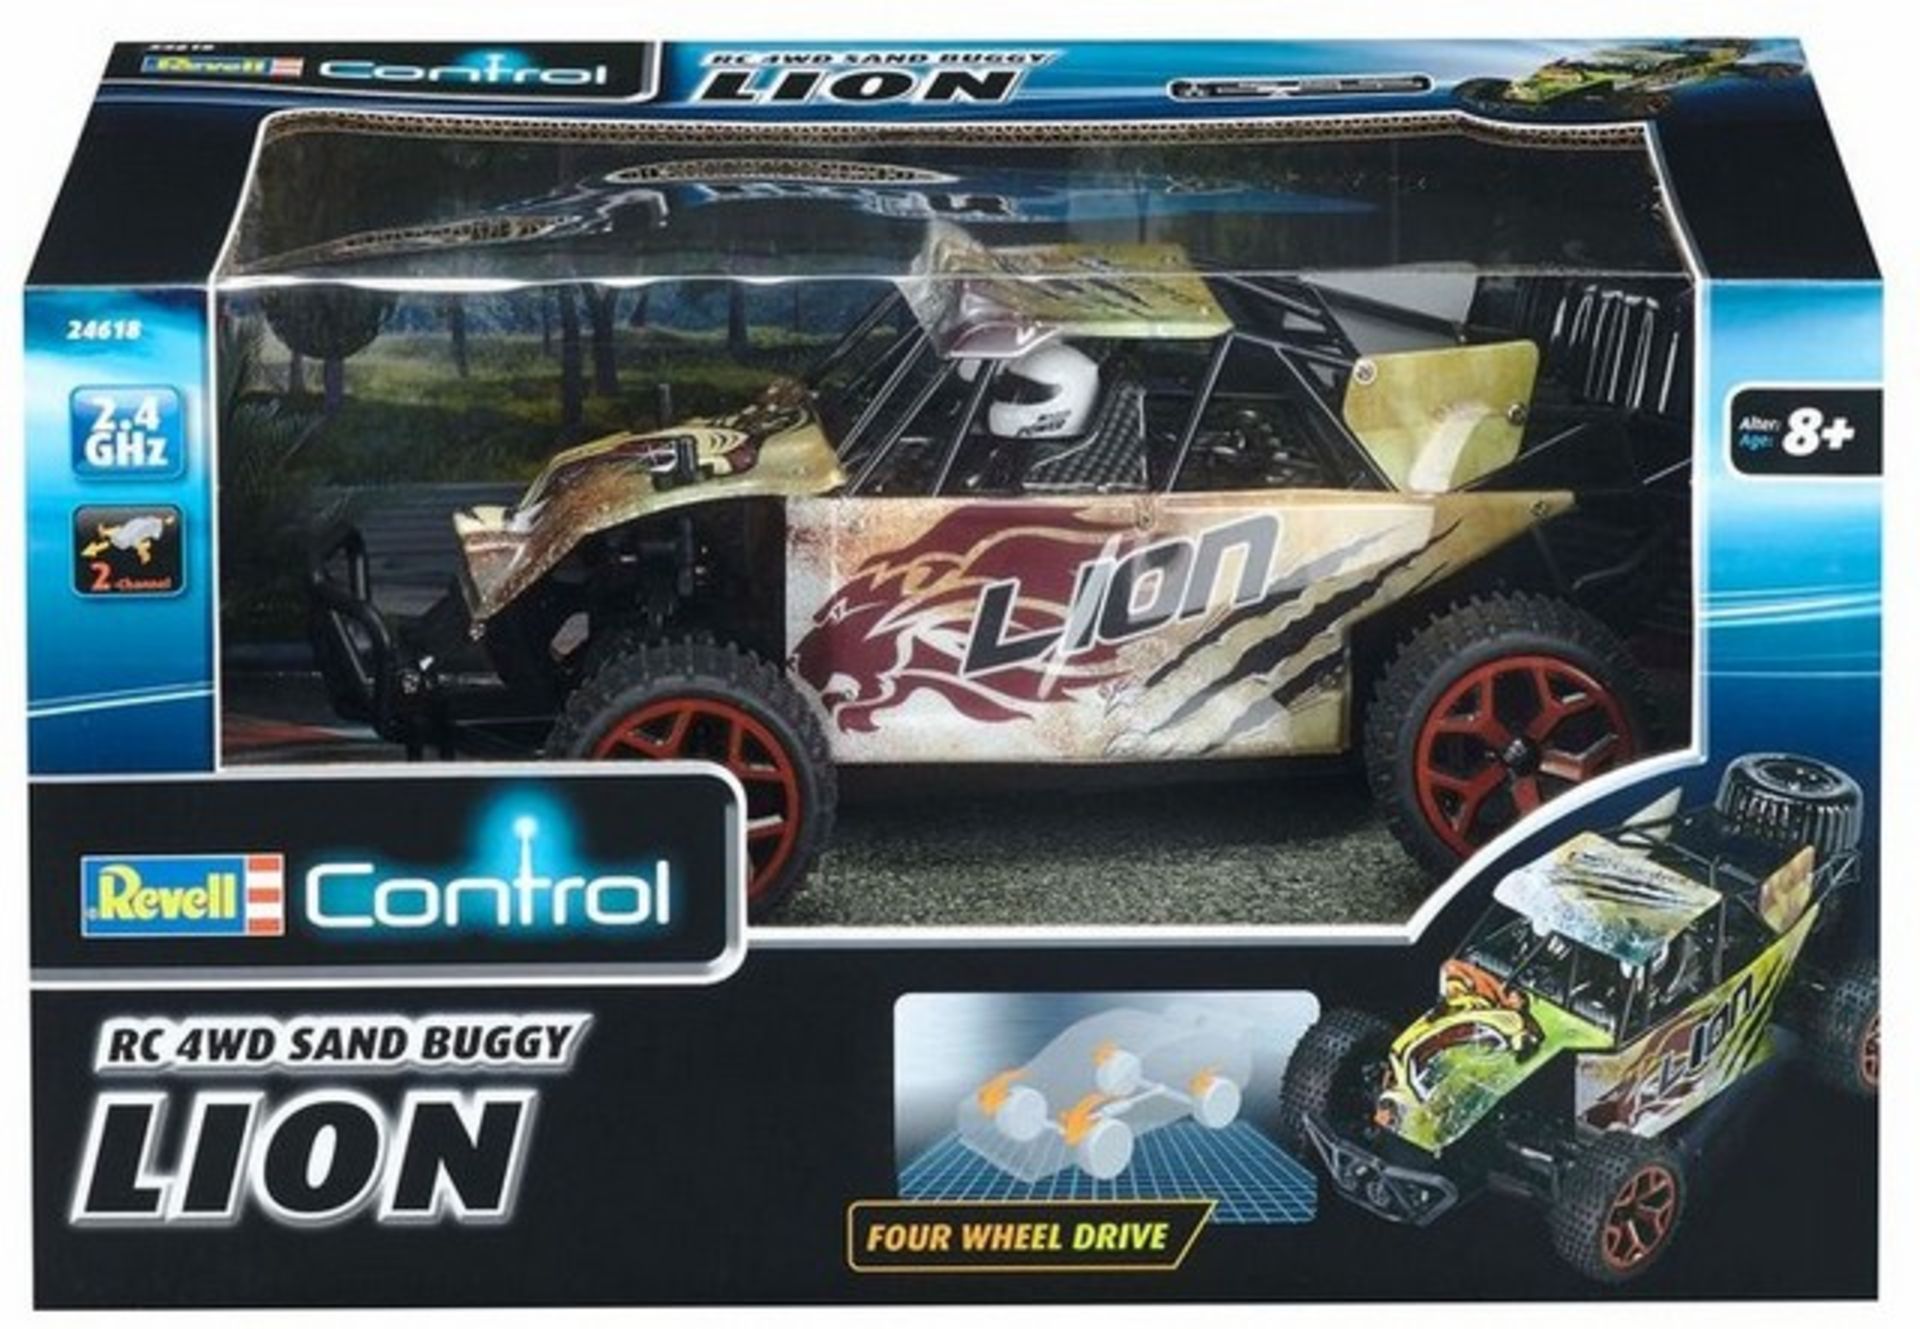 + VAT Brand New Revell R/C 4 Wheel Drive Sand Buggy Lion Up To 15 kph 2.4GHz 2 Channel Remote - Image 5 of 5